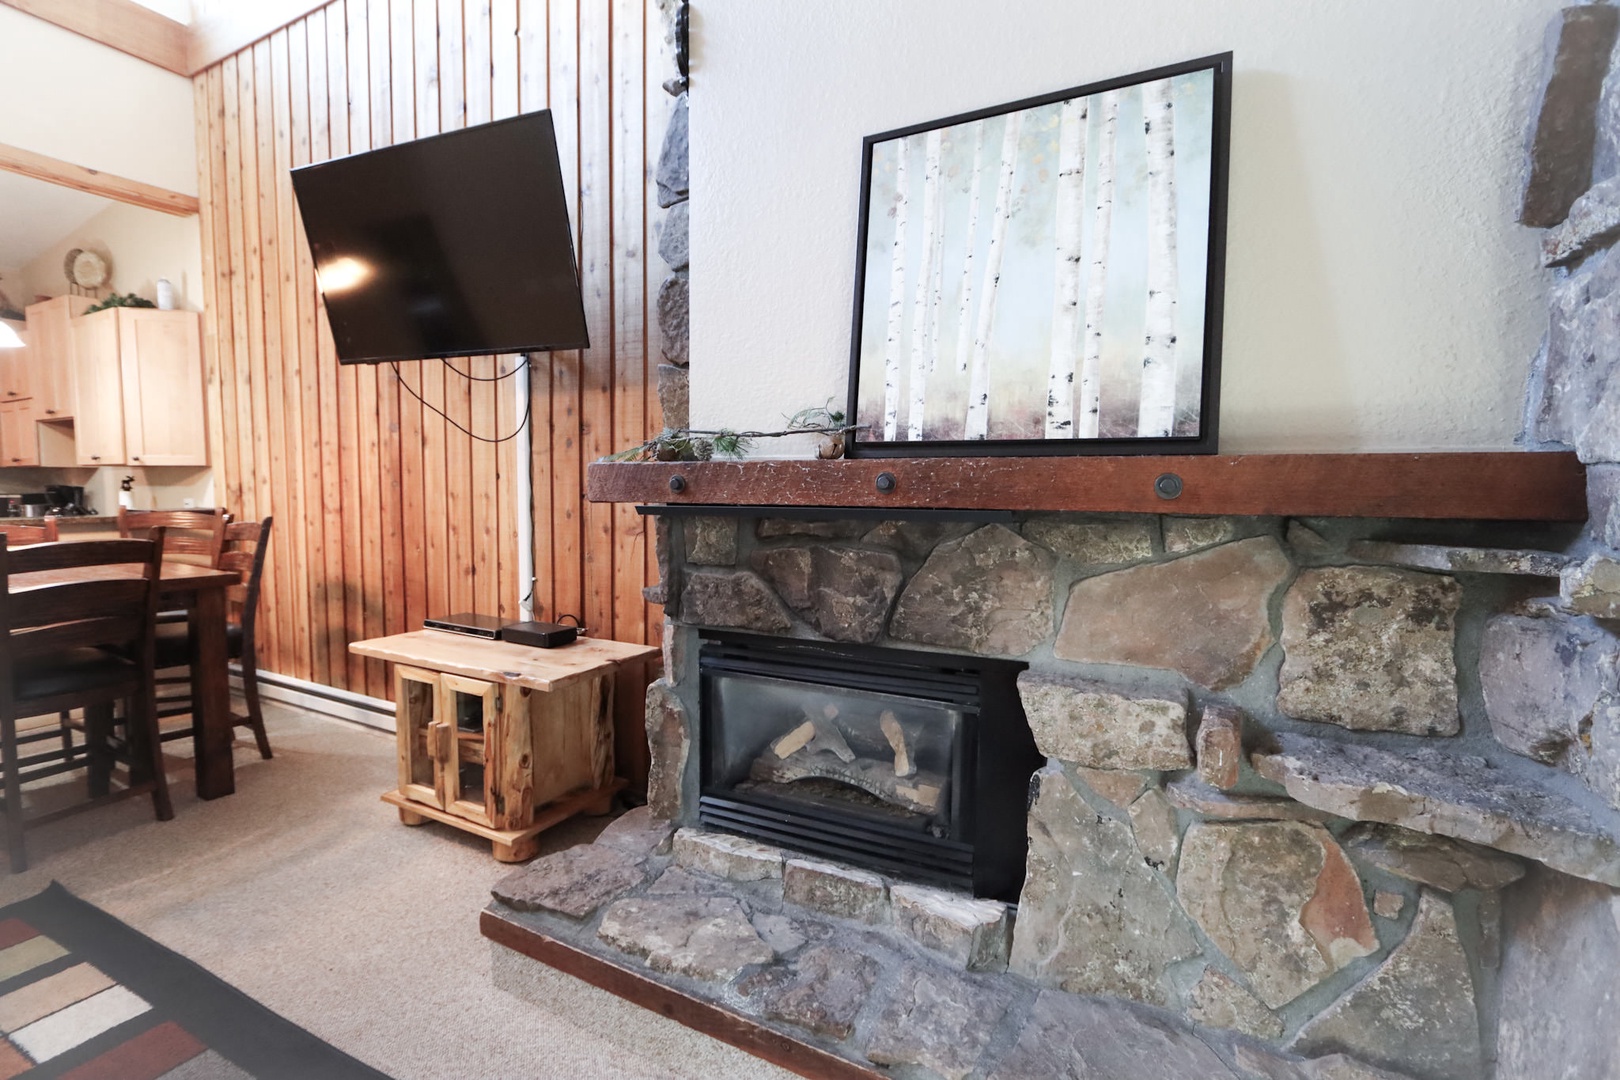 Gas fireplace and Smart TV